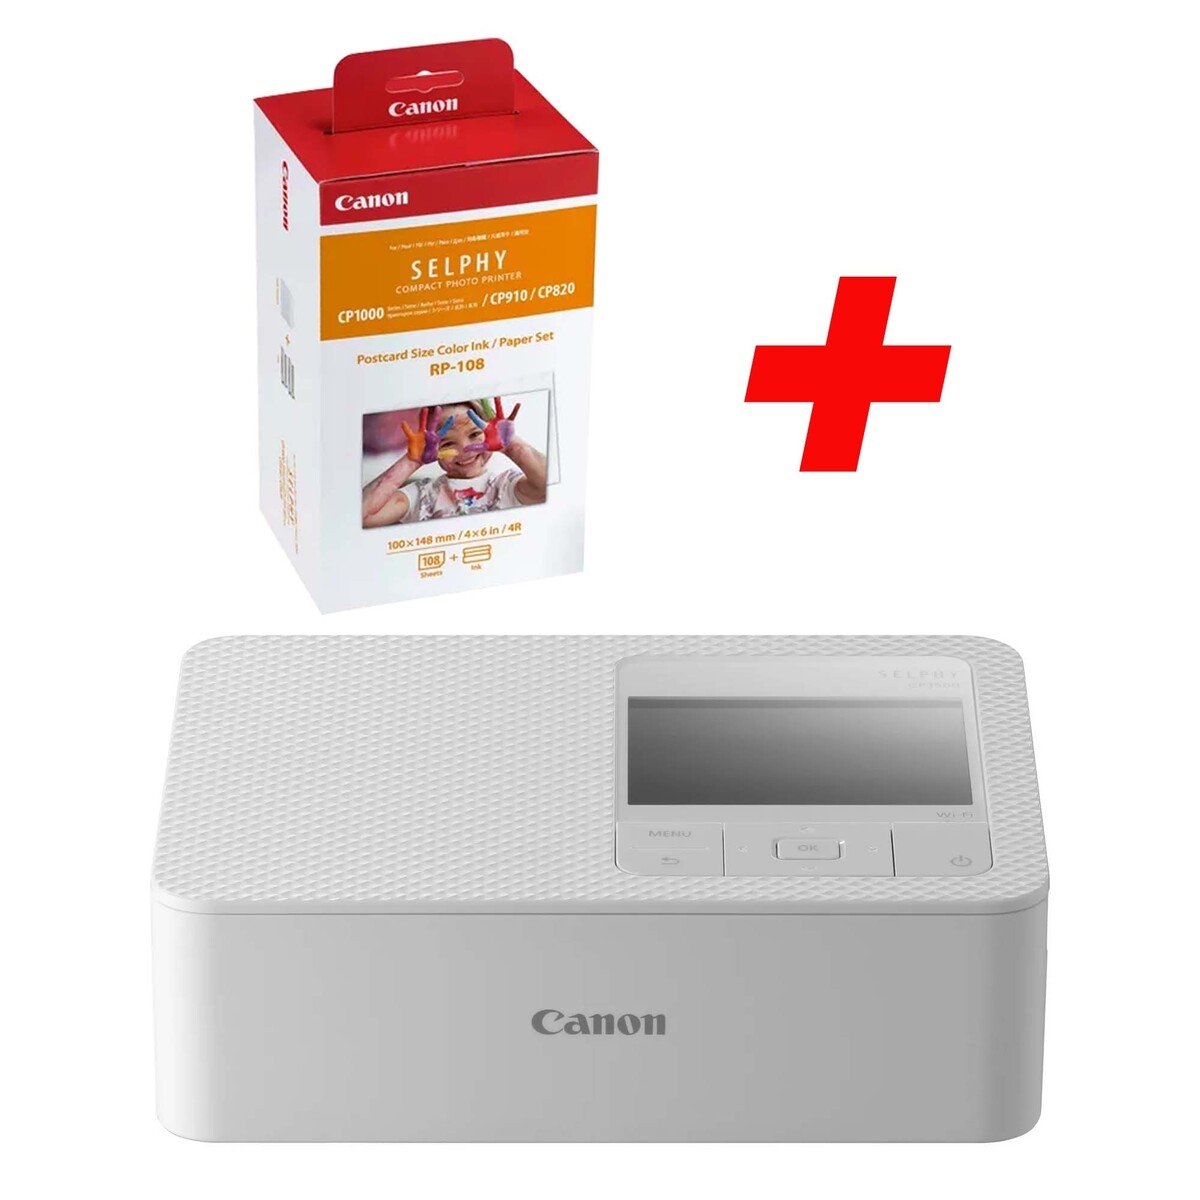 NEW! Canon SELPHY CP1500 Wireless Compact Photo Printer (White)